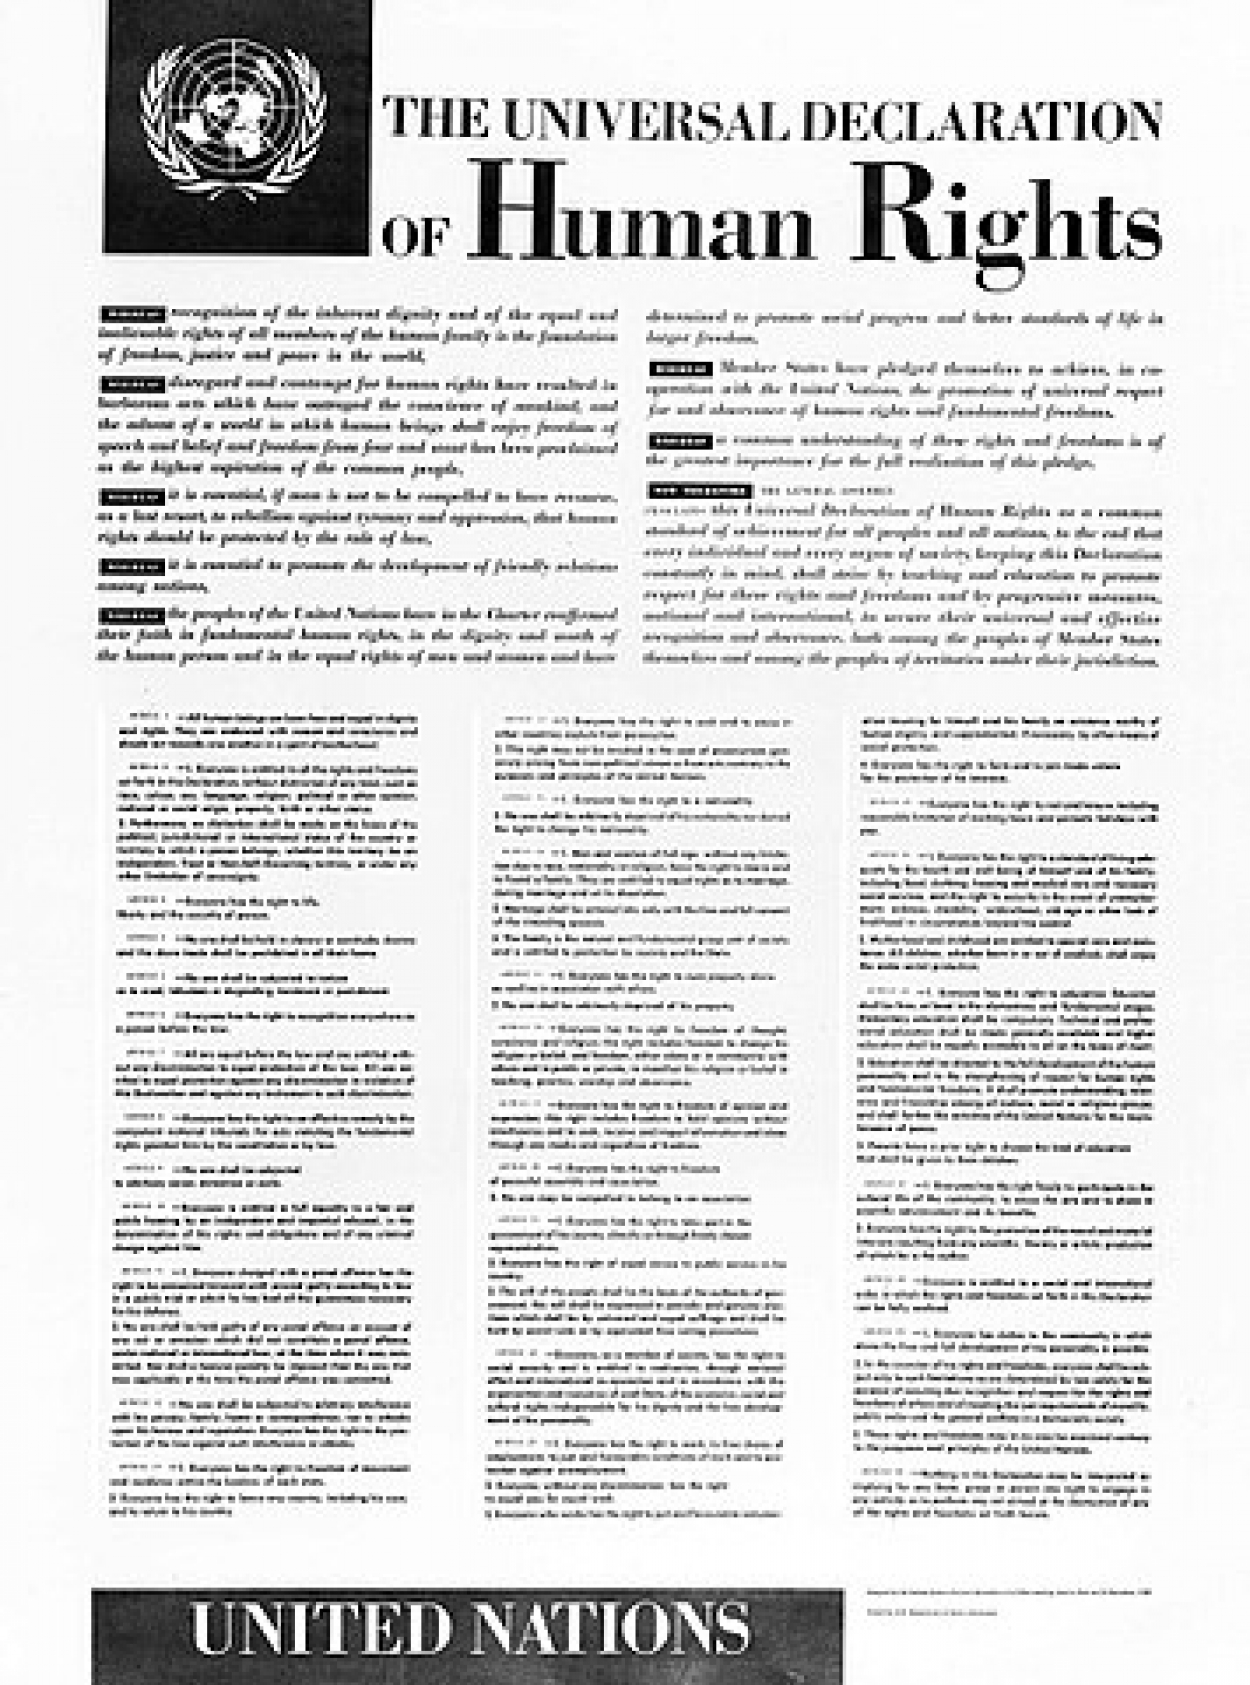 356px-the_universal_declaration_of_human_rights_10_december_1948.jpg